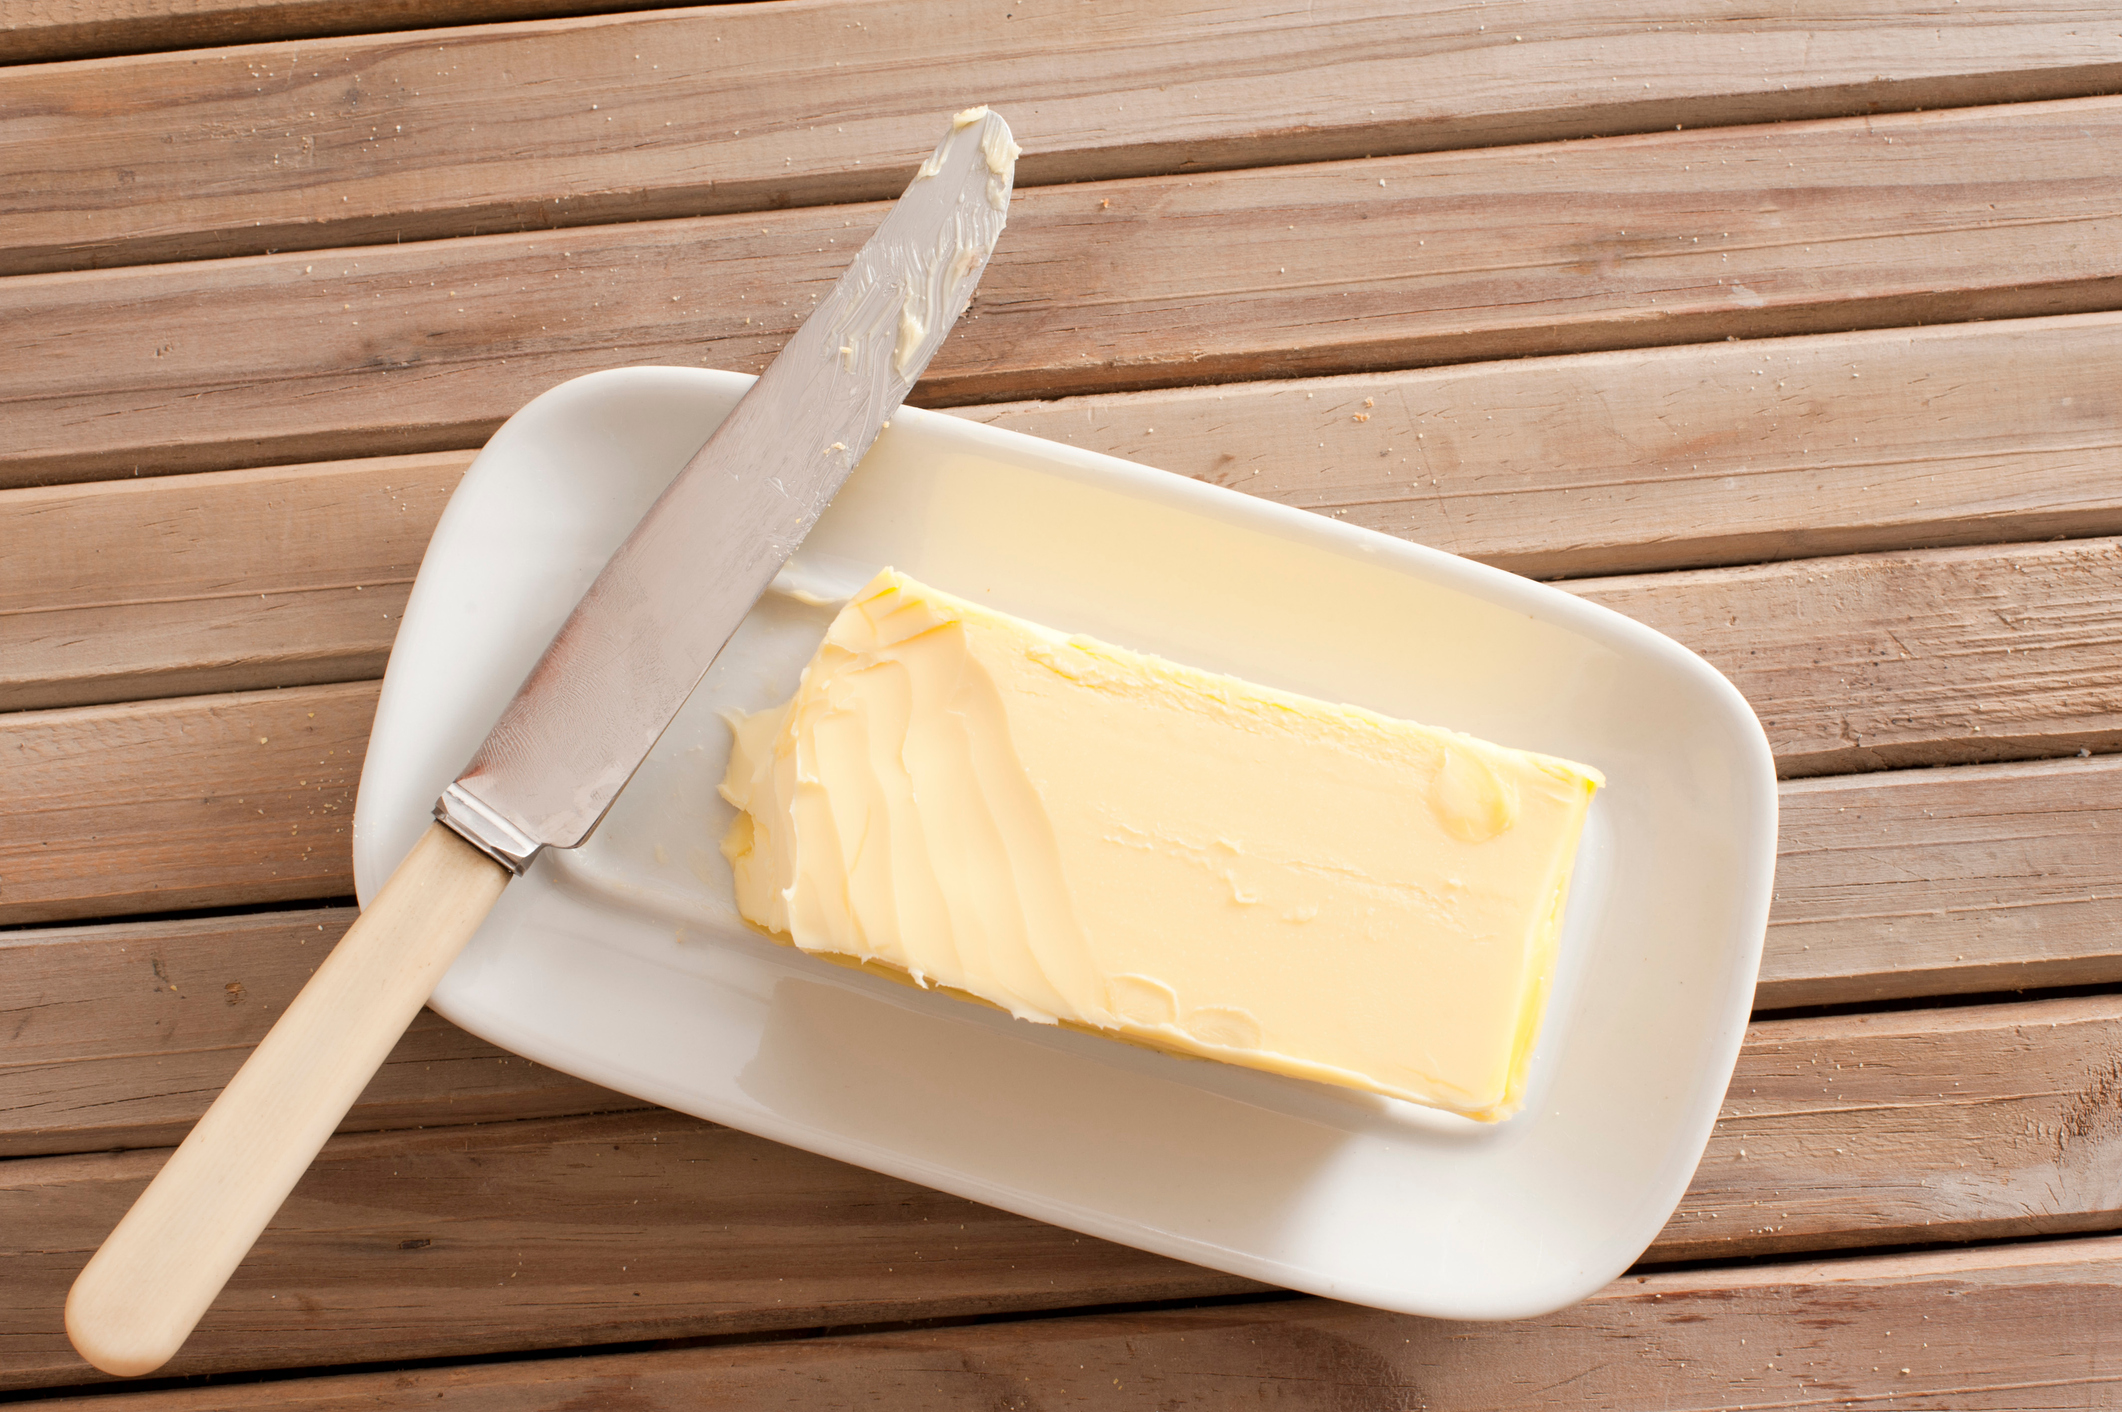 As the holiday baking season approaches, the U.S. Department of Agriculture (USDA) and some suppliers are warning that stocks are lower than normal—prompting concerns about a possible butter shortage. (STEPHEN GIBSON PHOTOHOME.CO.UK—Getty Images)